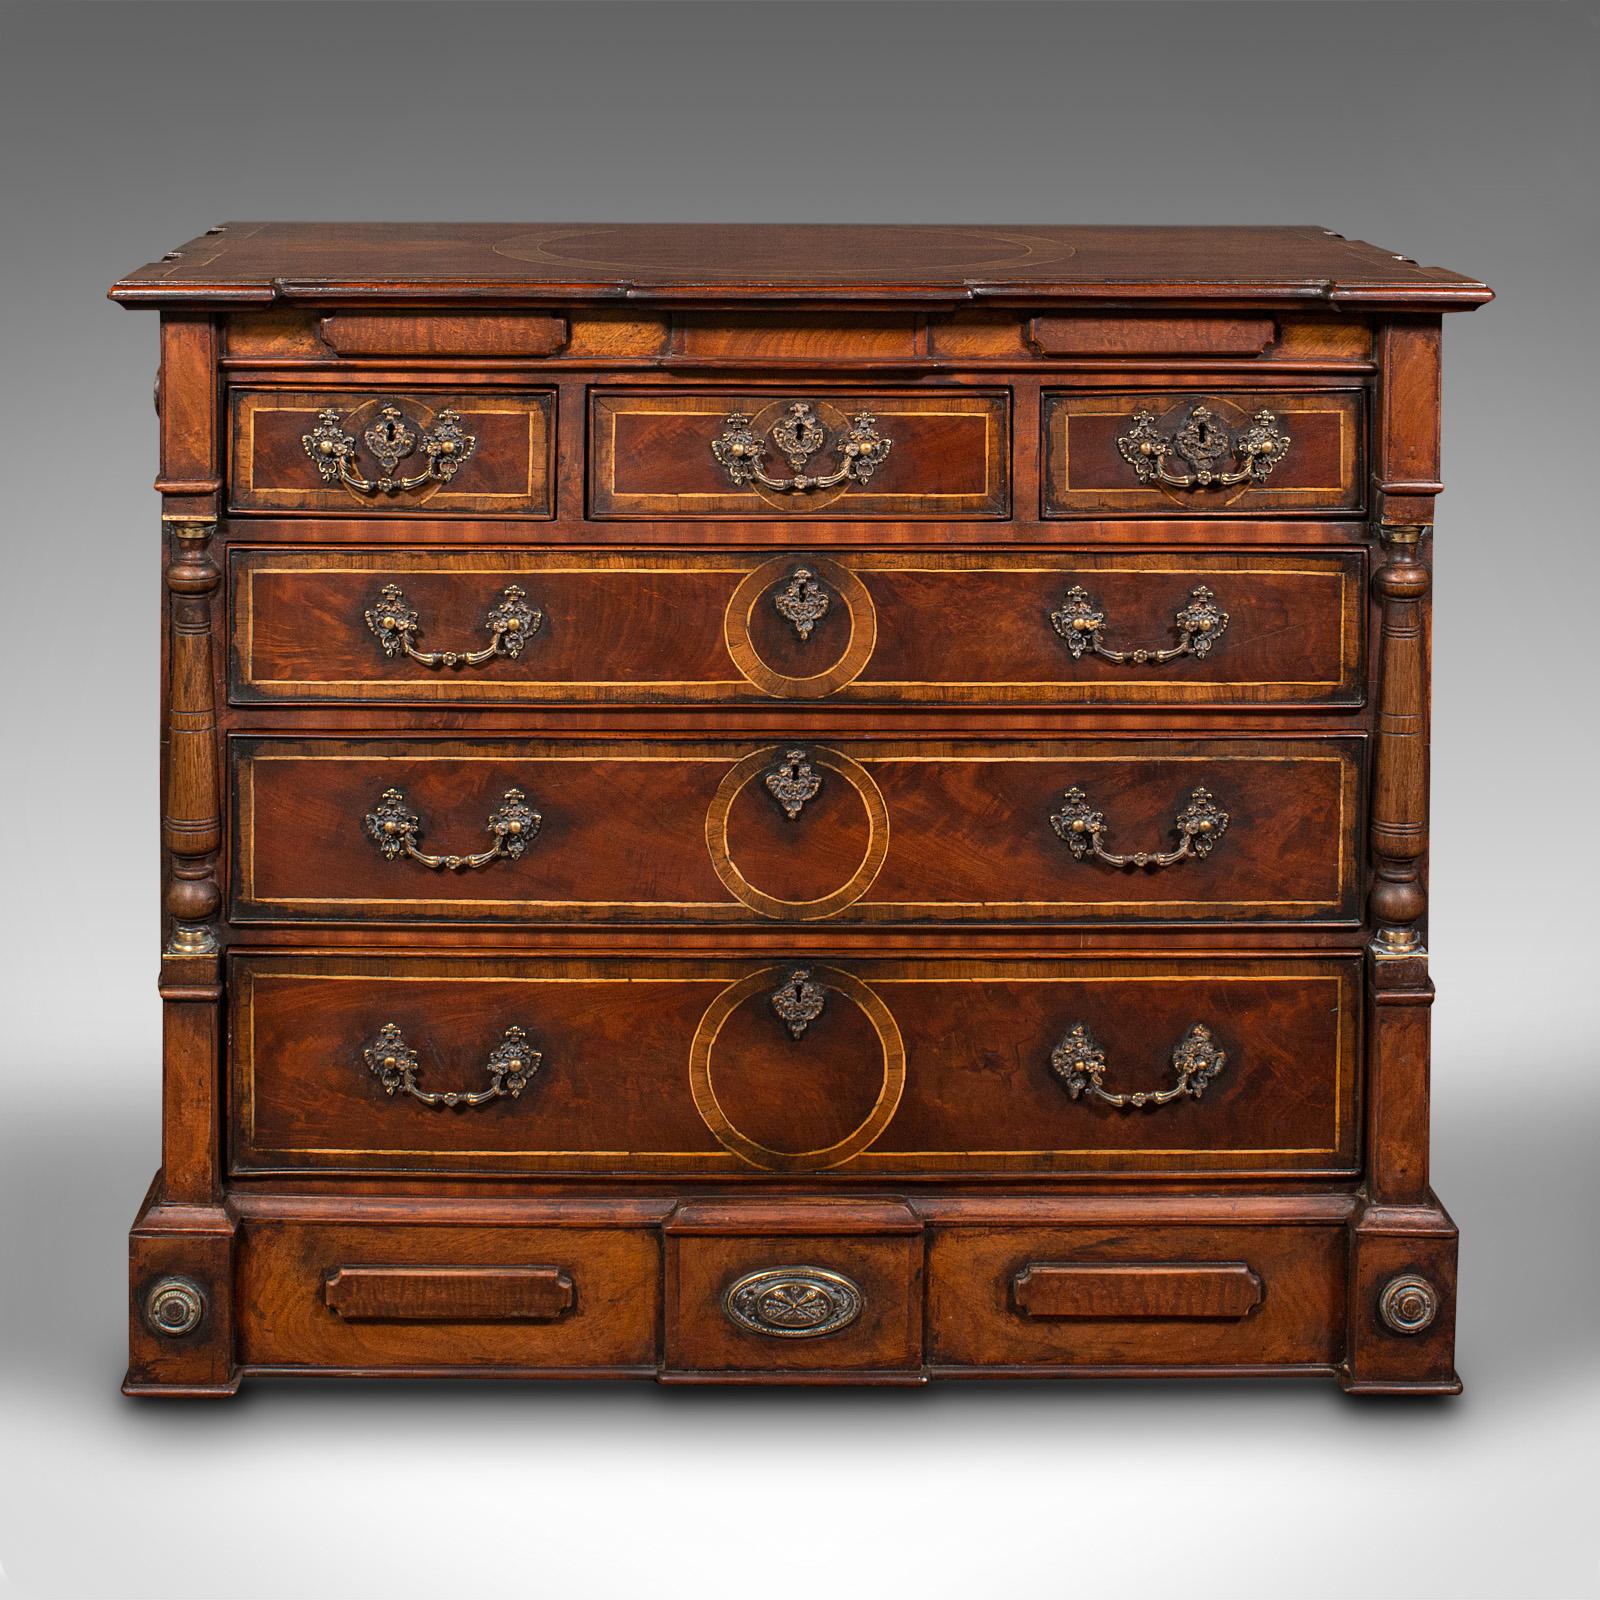 This is a vintage decorative chest of drawers. An English, mahogany and walnut drawing room storage cabinet in Georgian revival taste using quality antique stock, dating to the second half of the 20th century.

Striking and of fine craftsmanship,